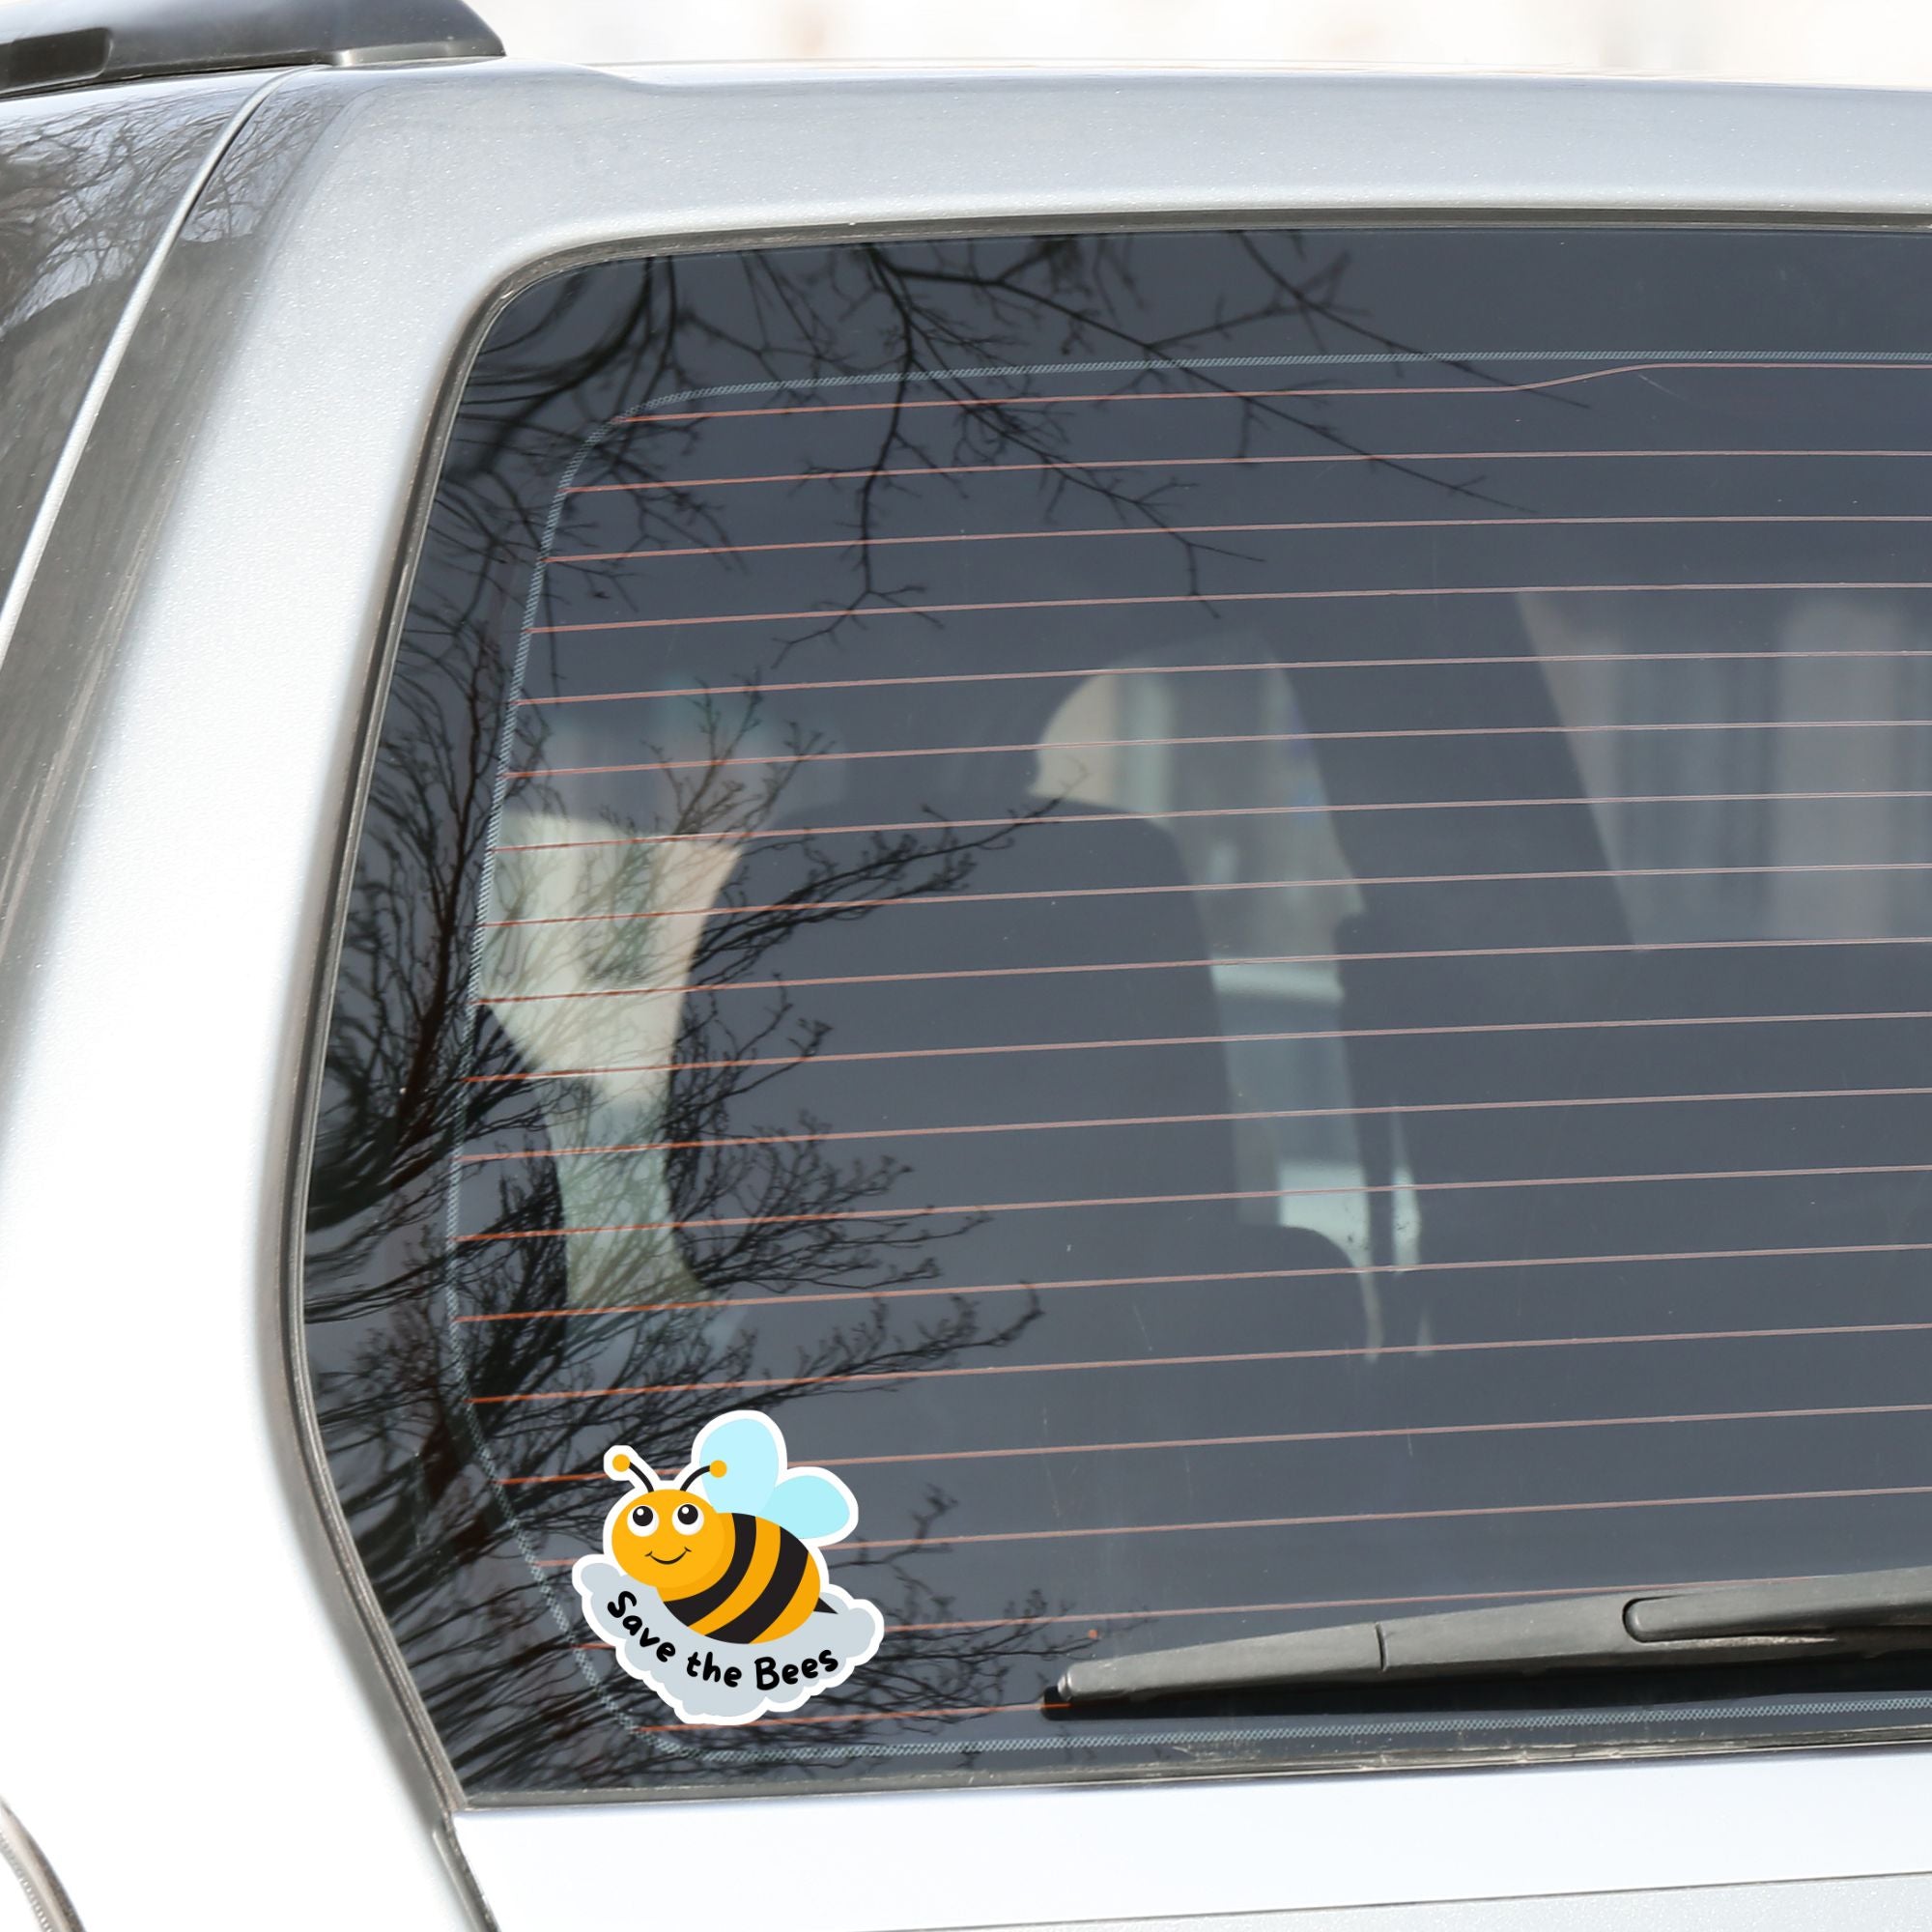 This cute individual die-cut sticker is great for anyone who appreciates our environment or just wants to smell the flowers. The Save the Bees sticker has a happy bumblebee with the saying Save the Bees below. Pair it with our Flowers, Ladybugs and Bees, or Buggin Around sticker sheets for a great gift. This image shows the Save the Bees die-cut sticker on the back window of a car.